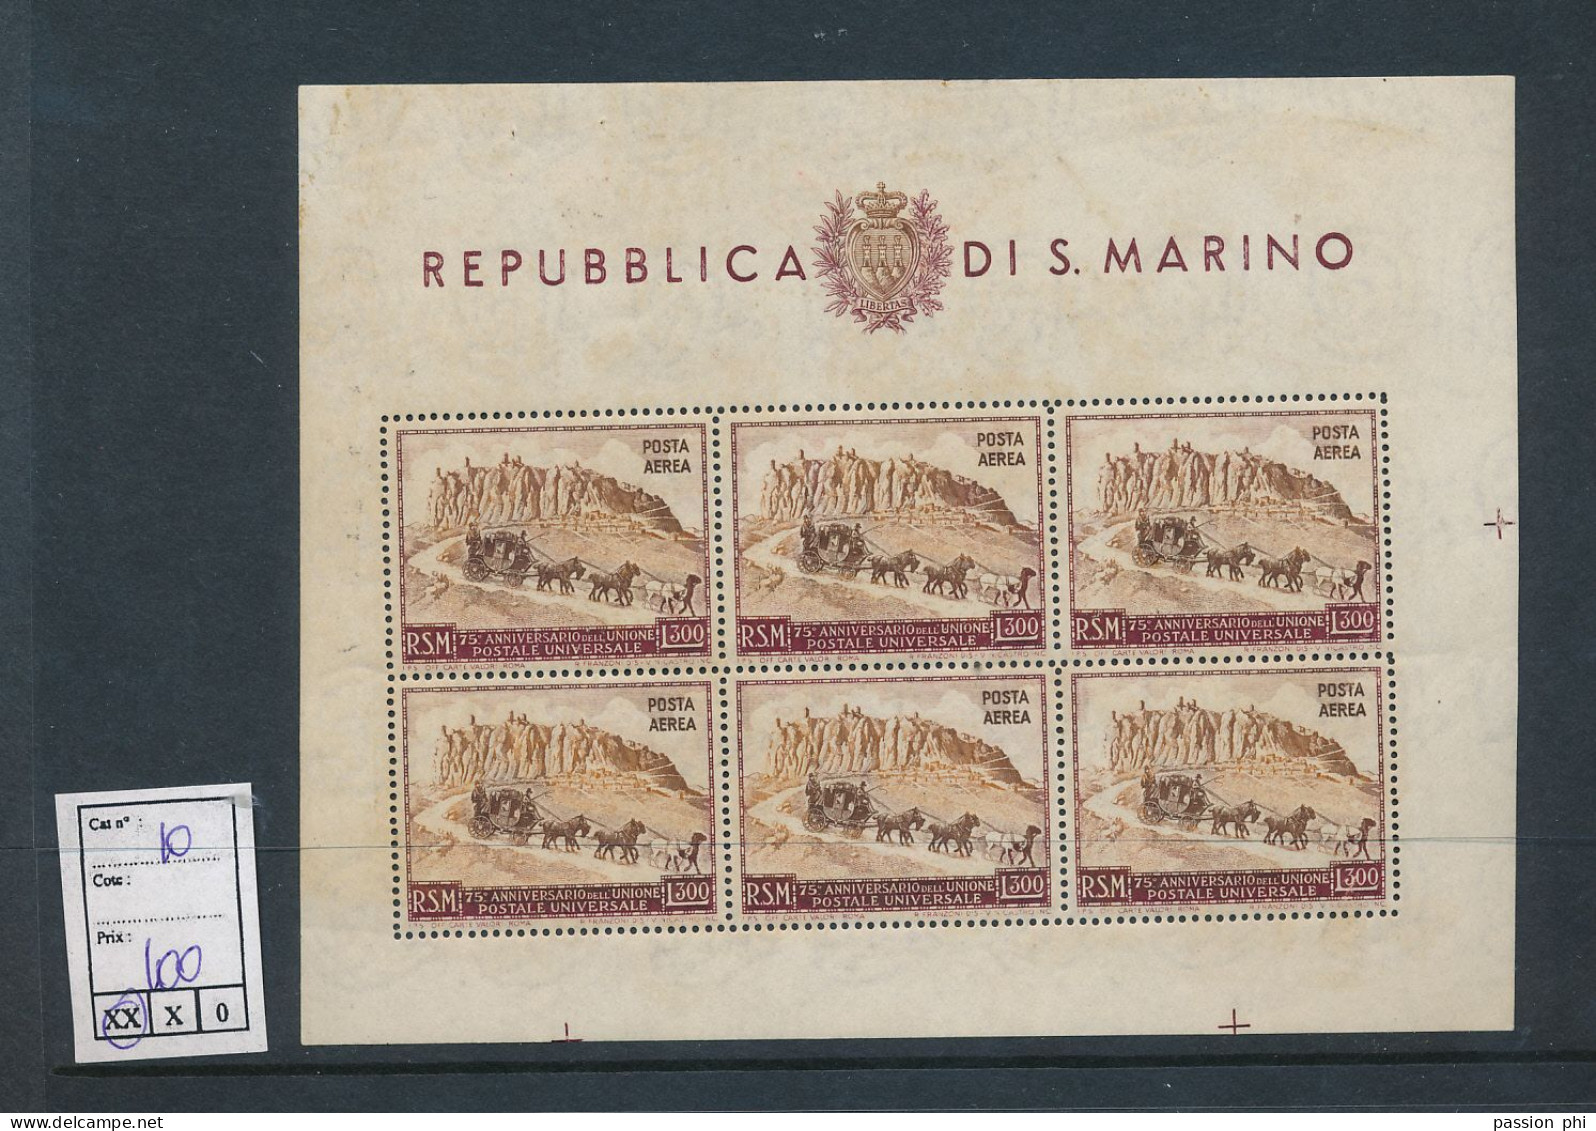 ST. MARINO SASSONE 10 MNH A LACK OF GUM AT THE TOP NORMAL FOR THIS BLOCK TWO PIN HOLES ON THE TOP - Blocks & Sheetlets